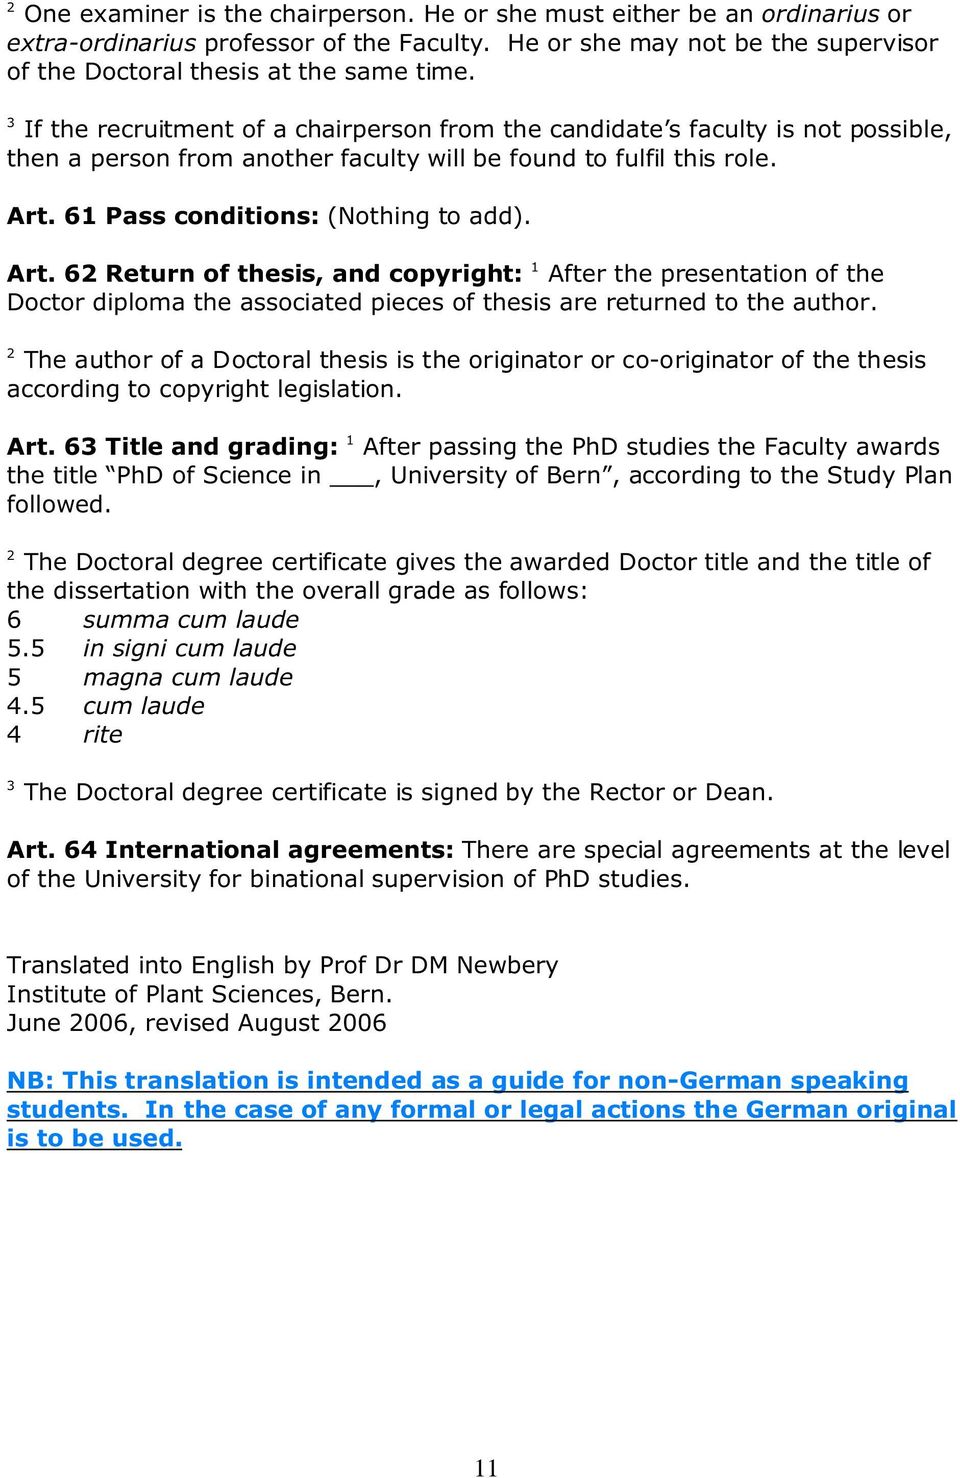 61 Pass conditions: (Nothing to add). Art. 6 Return of thesis, and copyright: 1 After the presentation of the Doctor diploma the associated pieces of thesis are returned to the author.